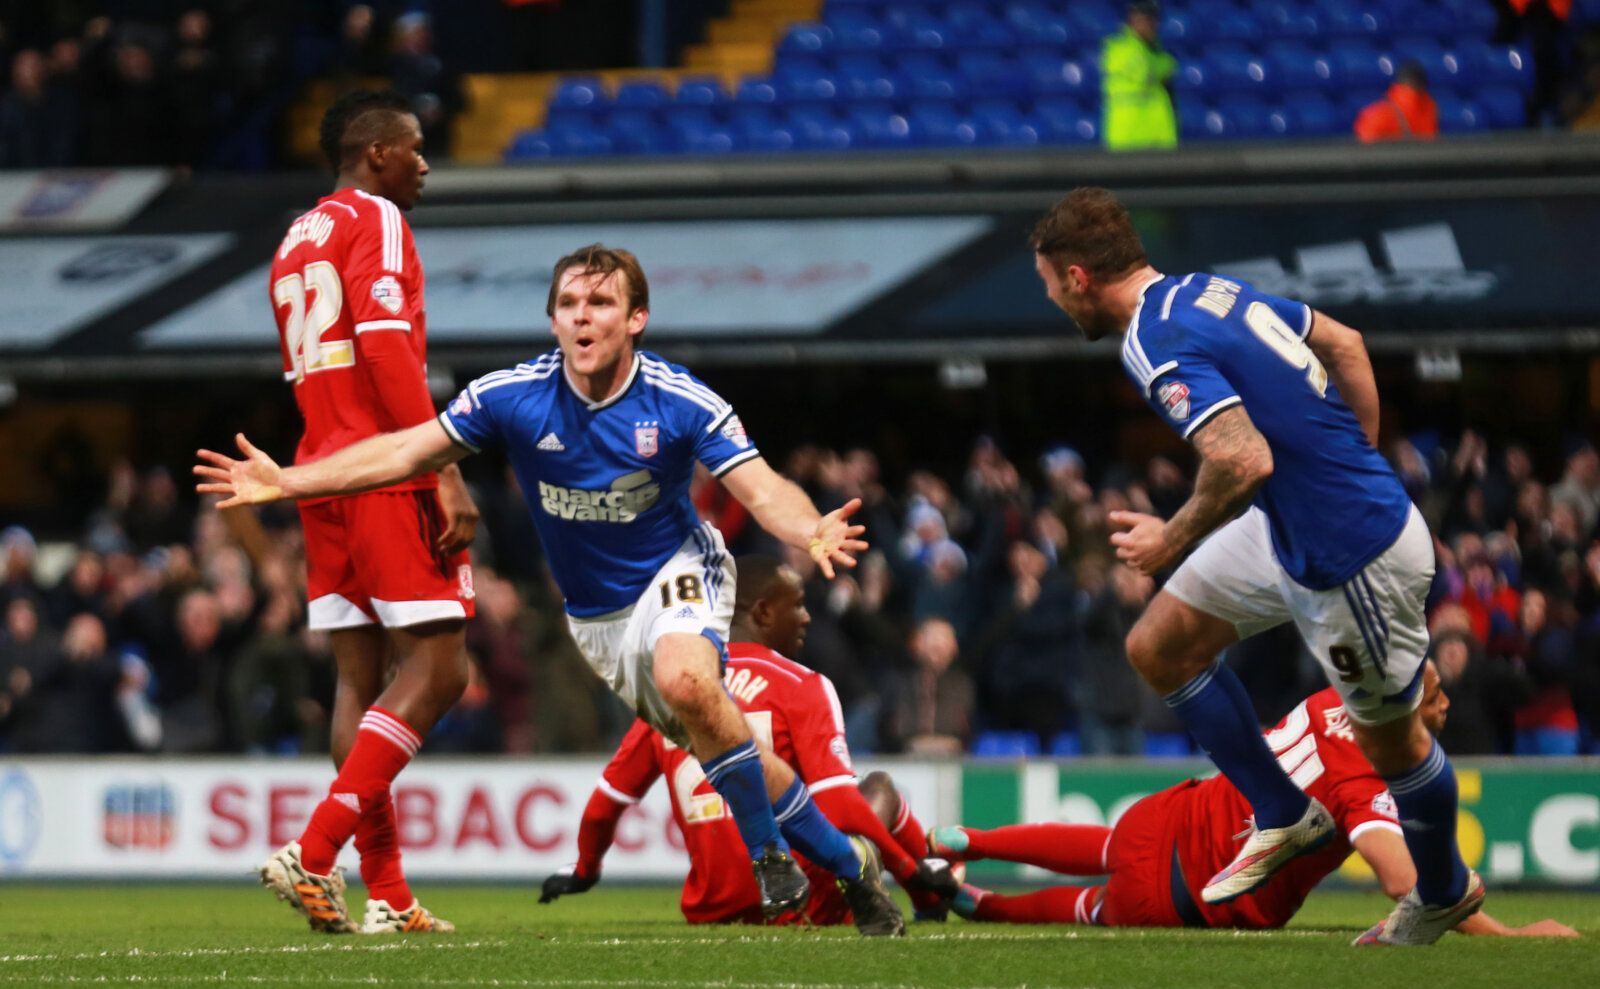 Football - Ipswich Town v Middlesbrough - Sky Bet Football League Championship - Portman Road - 20/12/14 
Ipswich Town's Jay Tabb celebrates scoring the second goal 
Mandatory Credit: Action Images / John Marsh 
Livepic 
EDITORIAL USE ONLY. No use with unauthorized audio, video, data, fixture lists, club/league logos or 